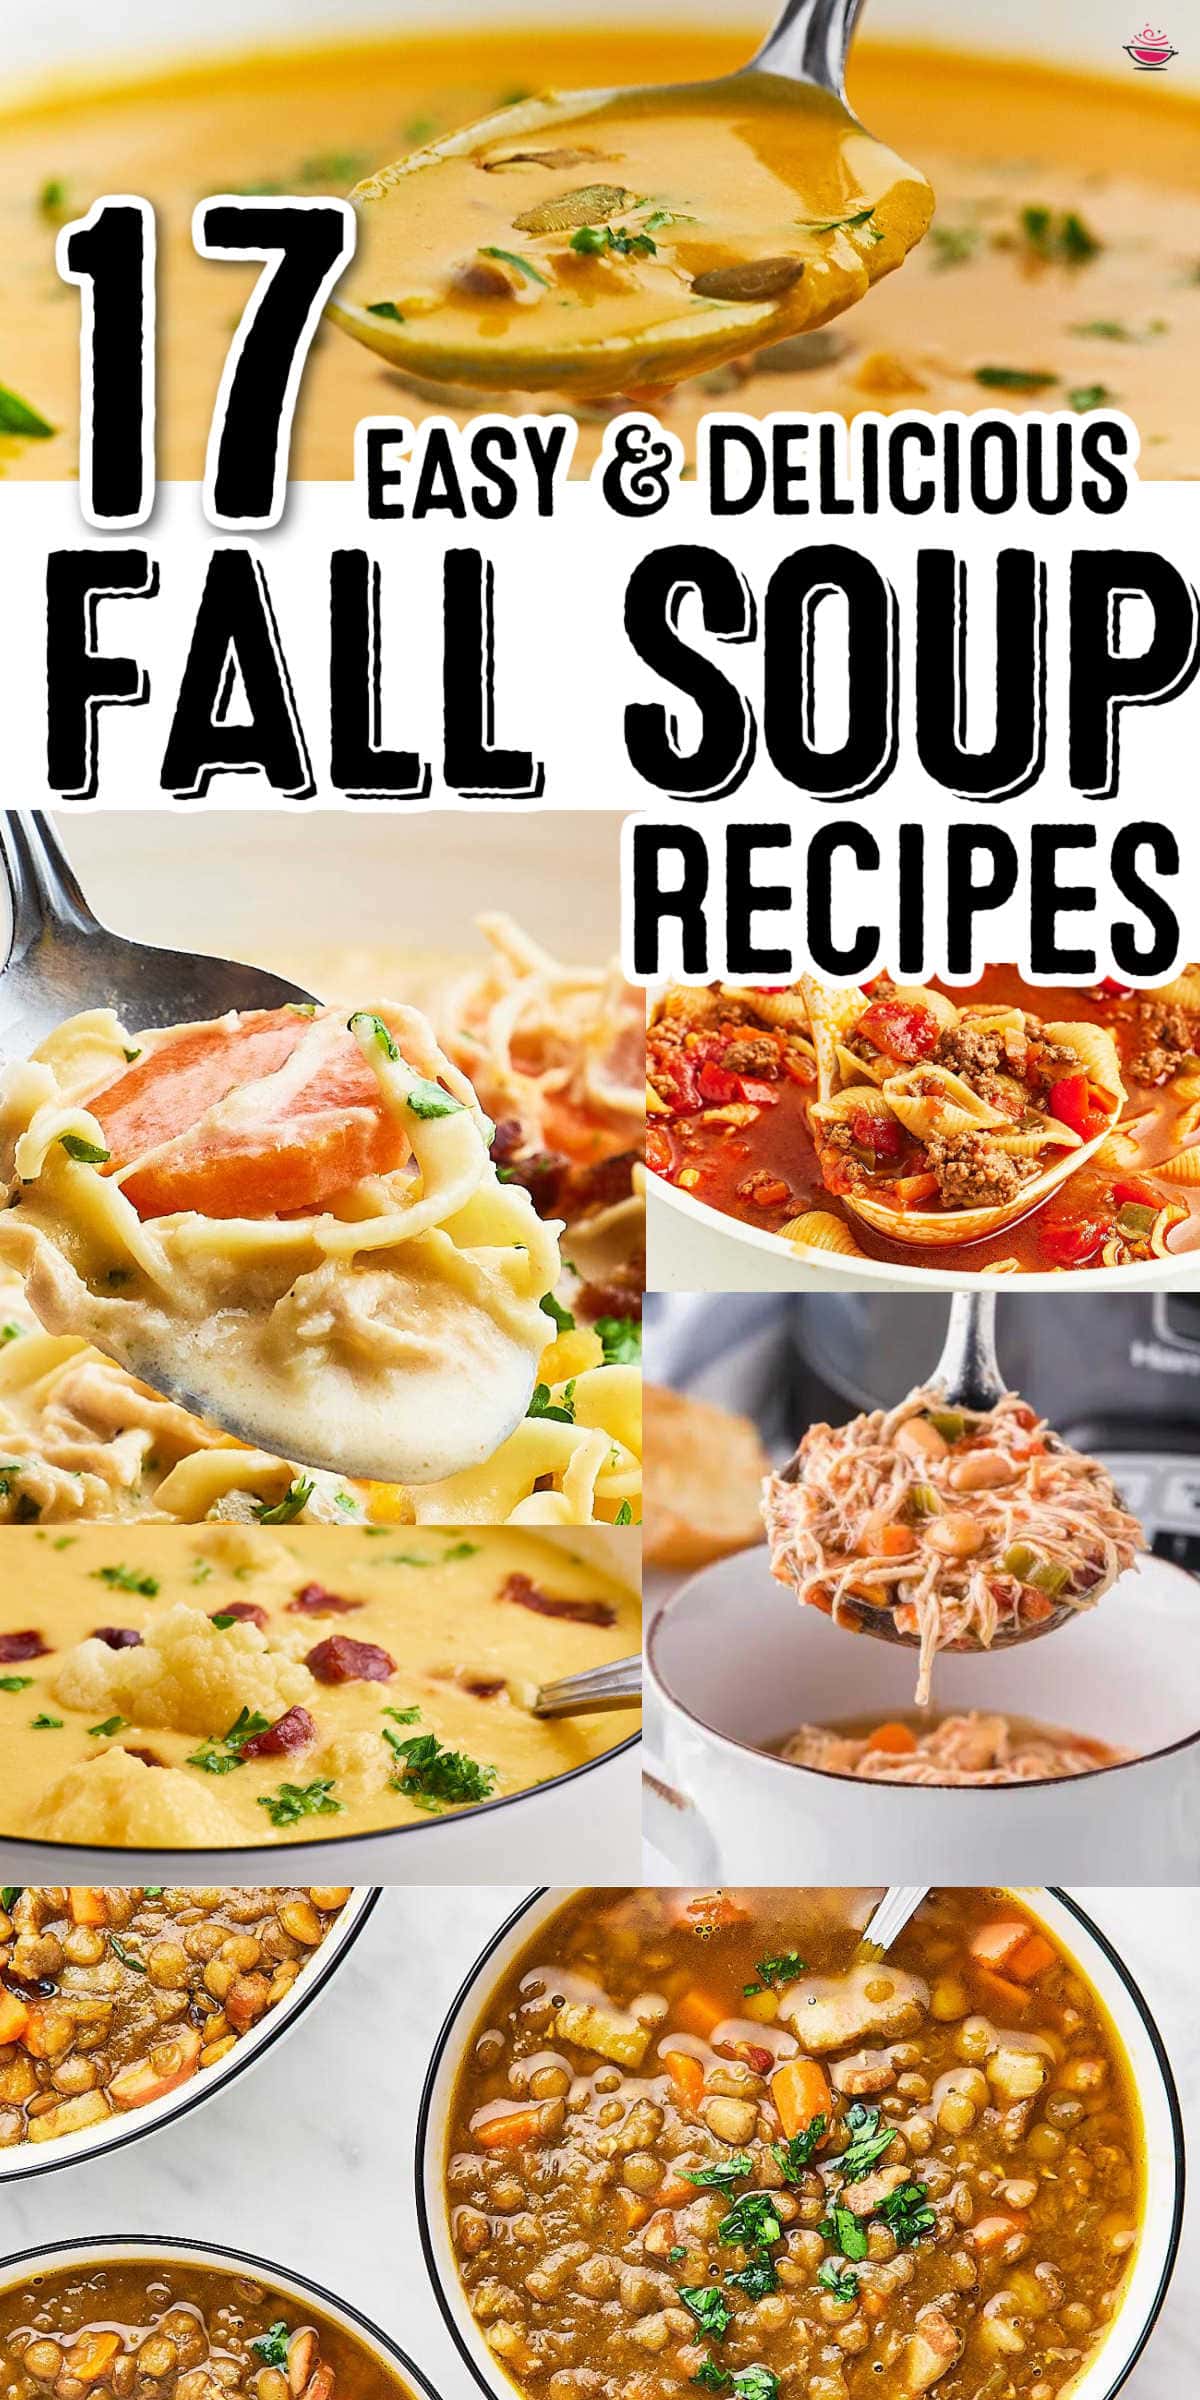 Ready to spice up your fall menu? We've got 17 incredible soup recipes that are far from ordinary! From hearty potato to zesty shrimp chowder, these soups will become your new autumn go-tos. Save now, enjoy all season long! #cheerfulcook #FallRecipes #SoupSeason #CozyEats #EasyRecipes #HomeCooking via @cheerfulcook